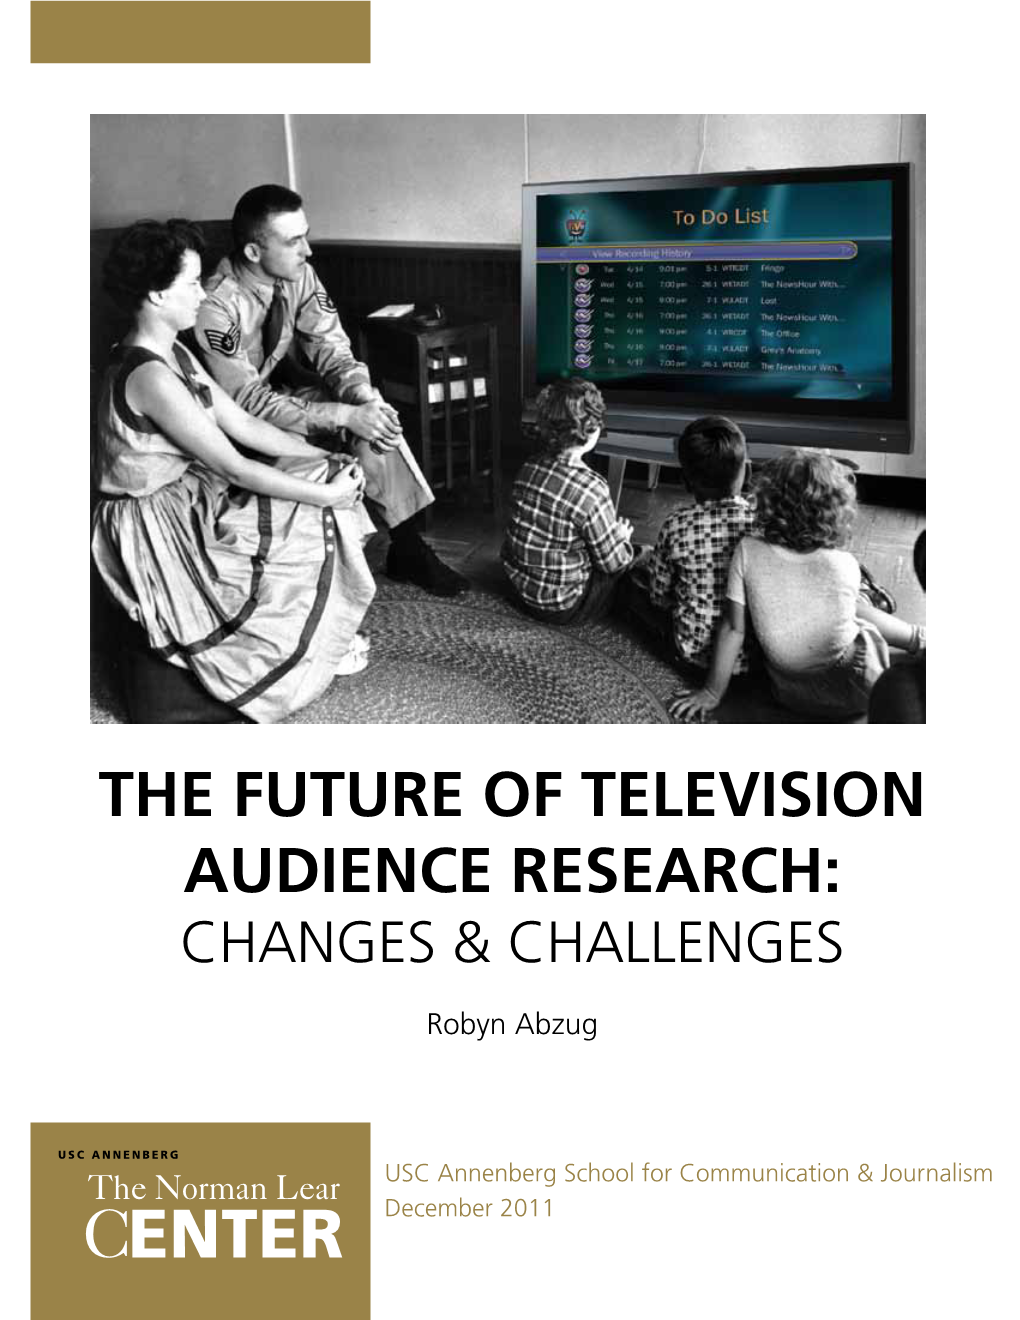 The Future of Television Audience Research: Changes & Challenges